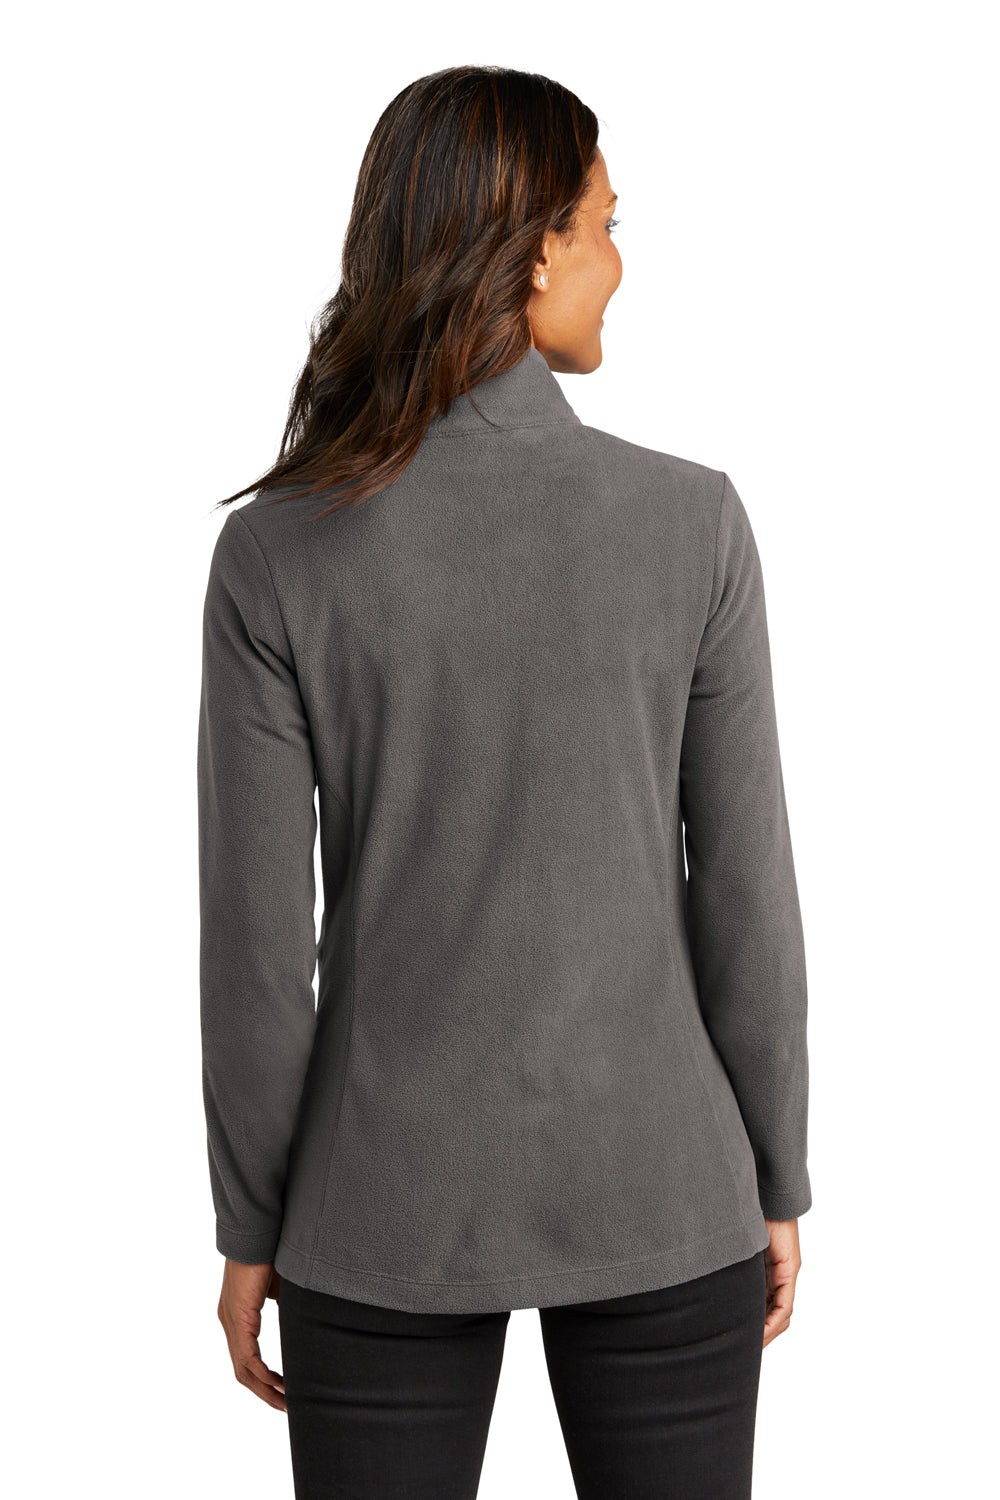 Port Authority L151 Womens Accord Microfleece Full Zip Jacket Pewter Grey Back